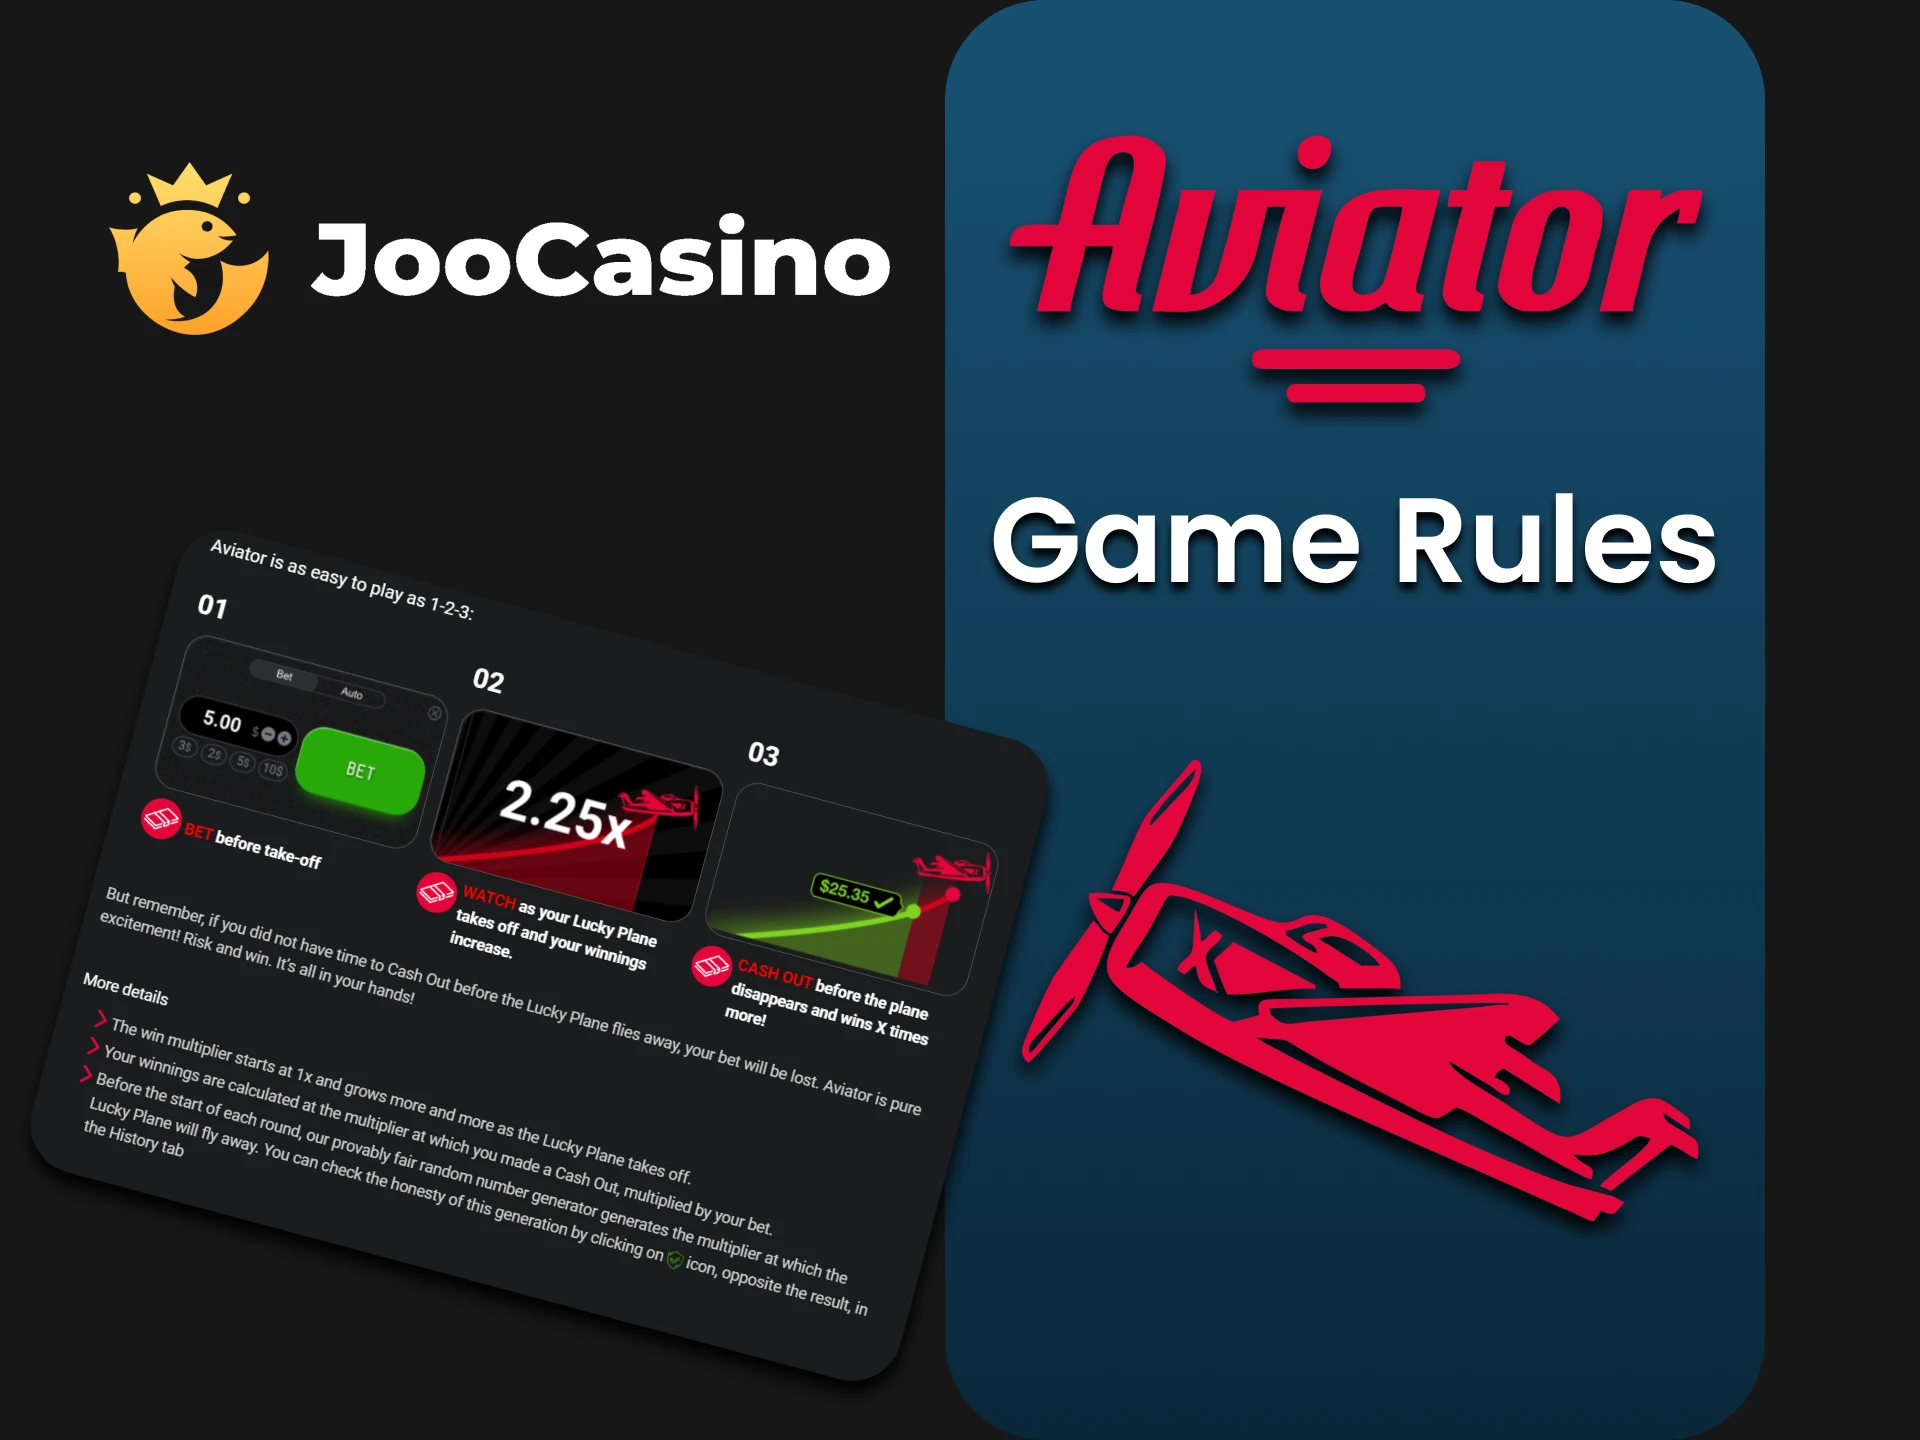 Learn the rules of the Aviator game to win at Joo Casino.